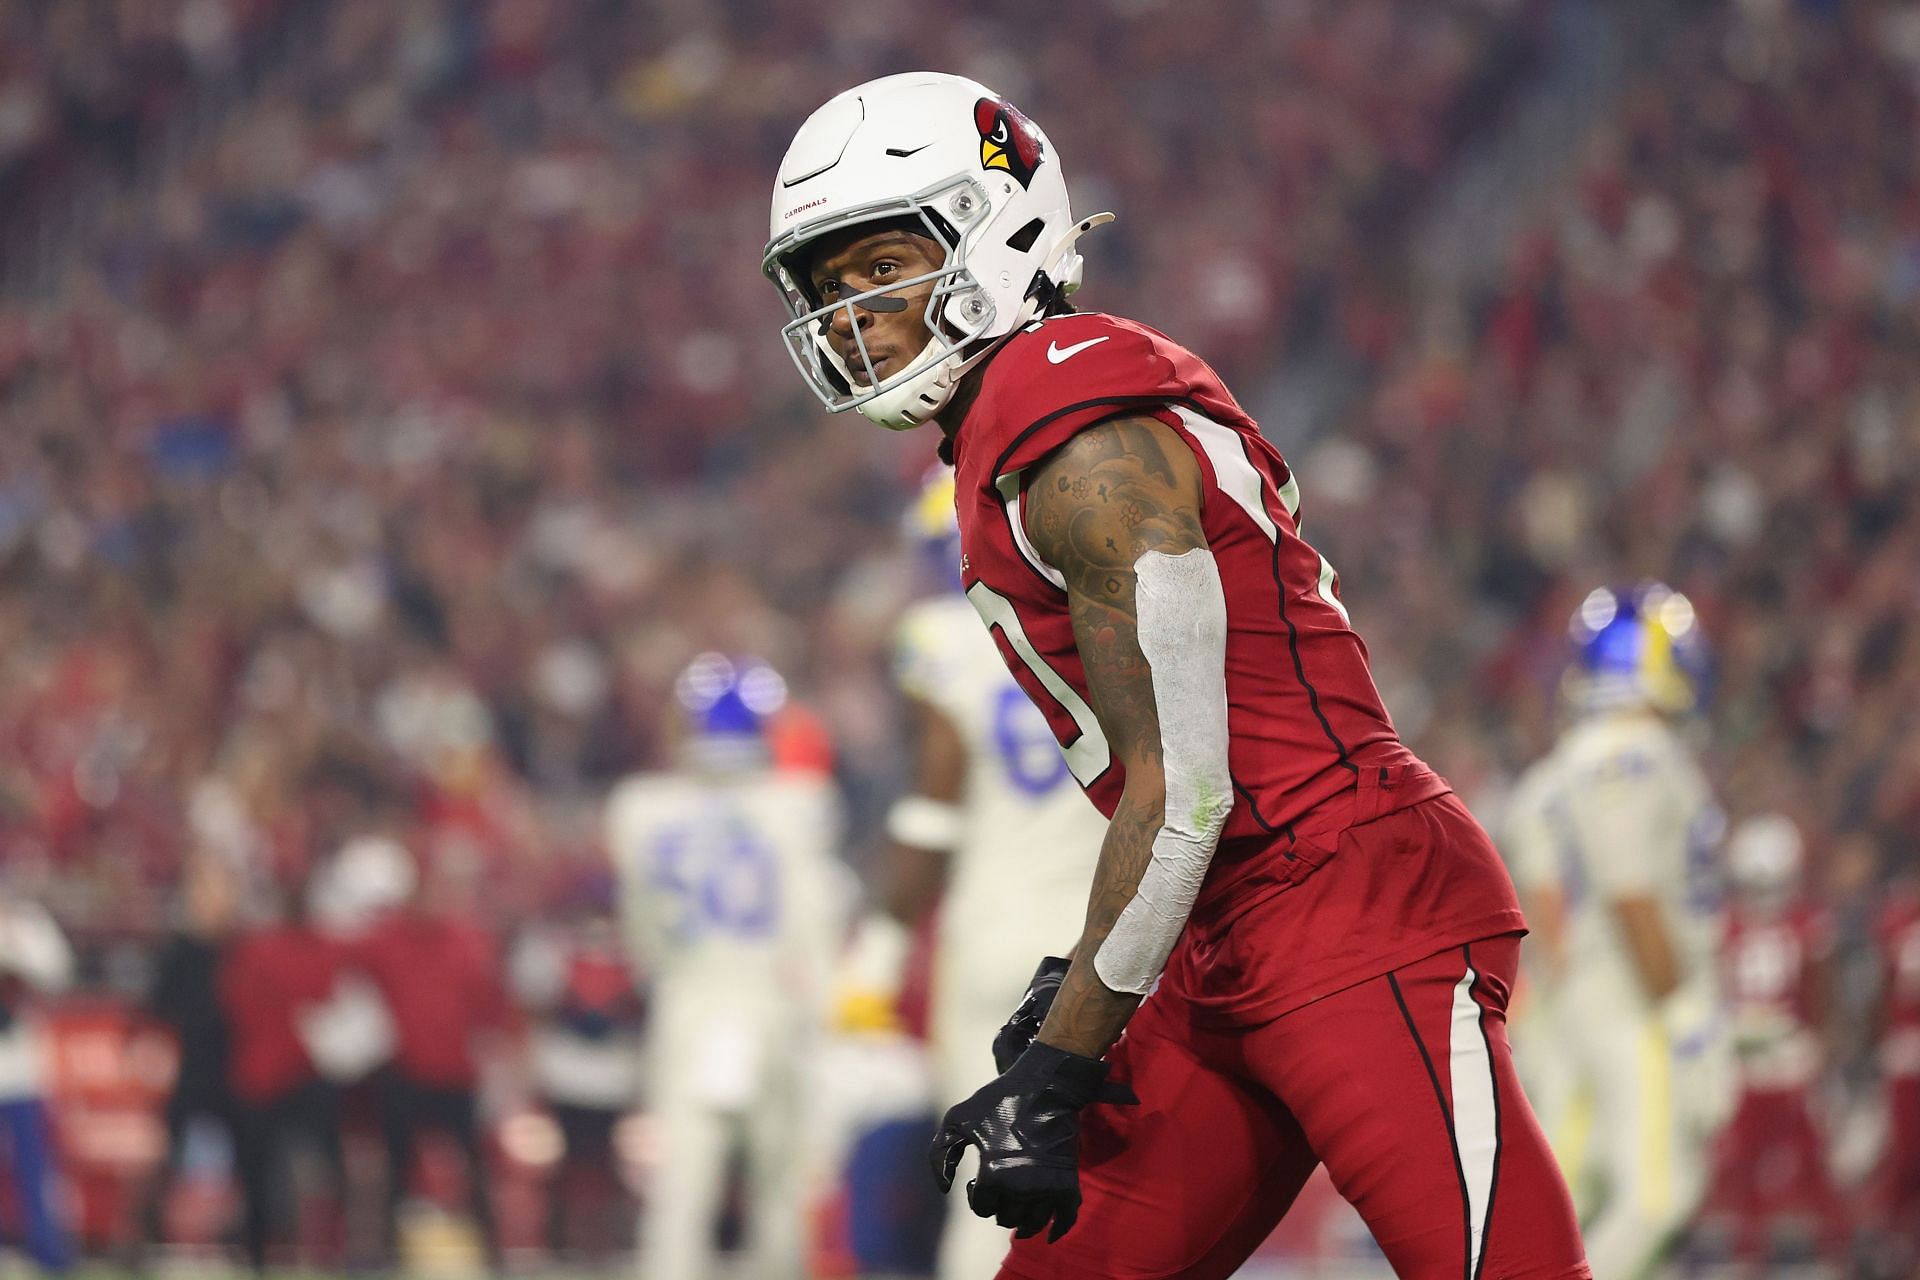 Arizona Cardinals WR DeAndre Hopkins leads the Top 10 NFL players from Clemson